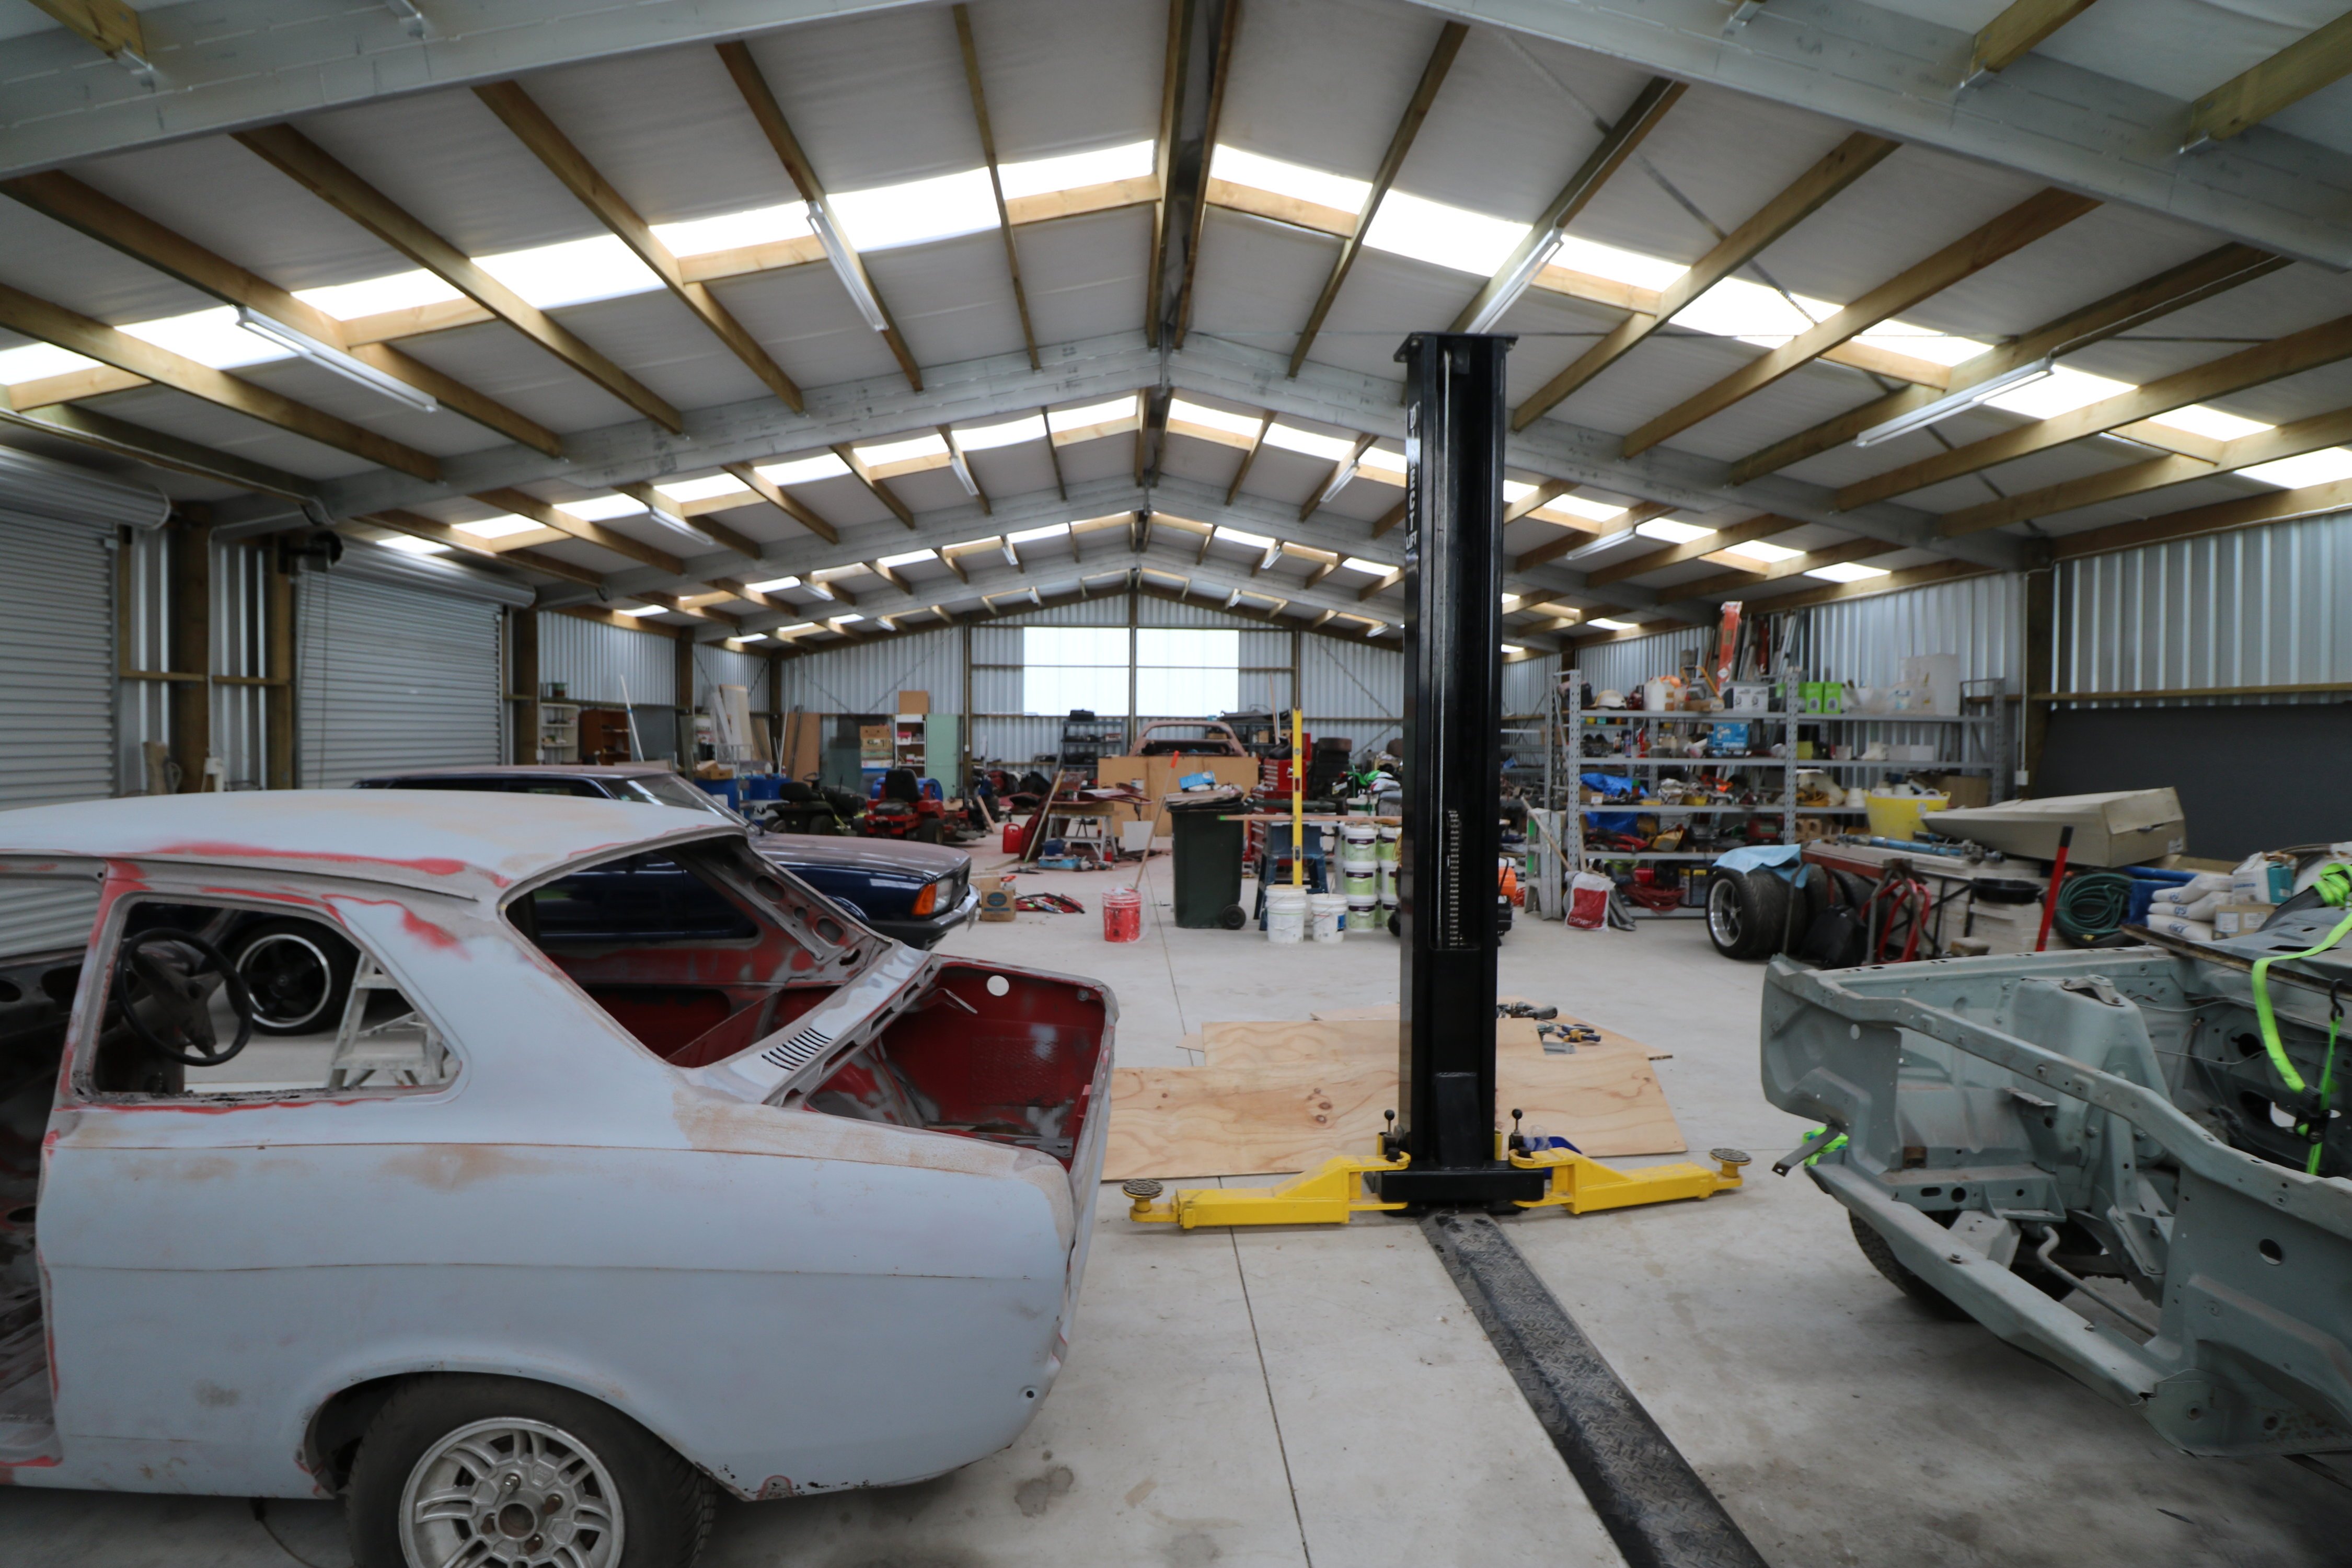 Work on your cars and projects in your very own man cave